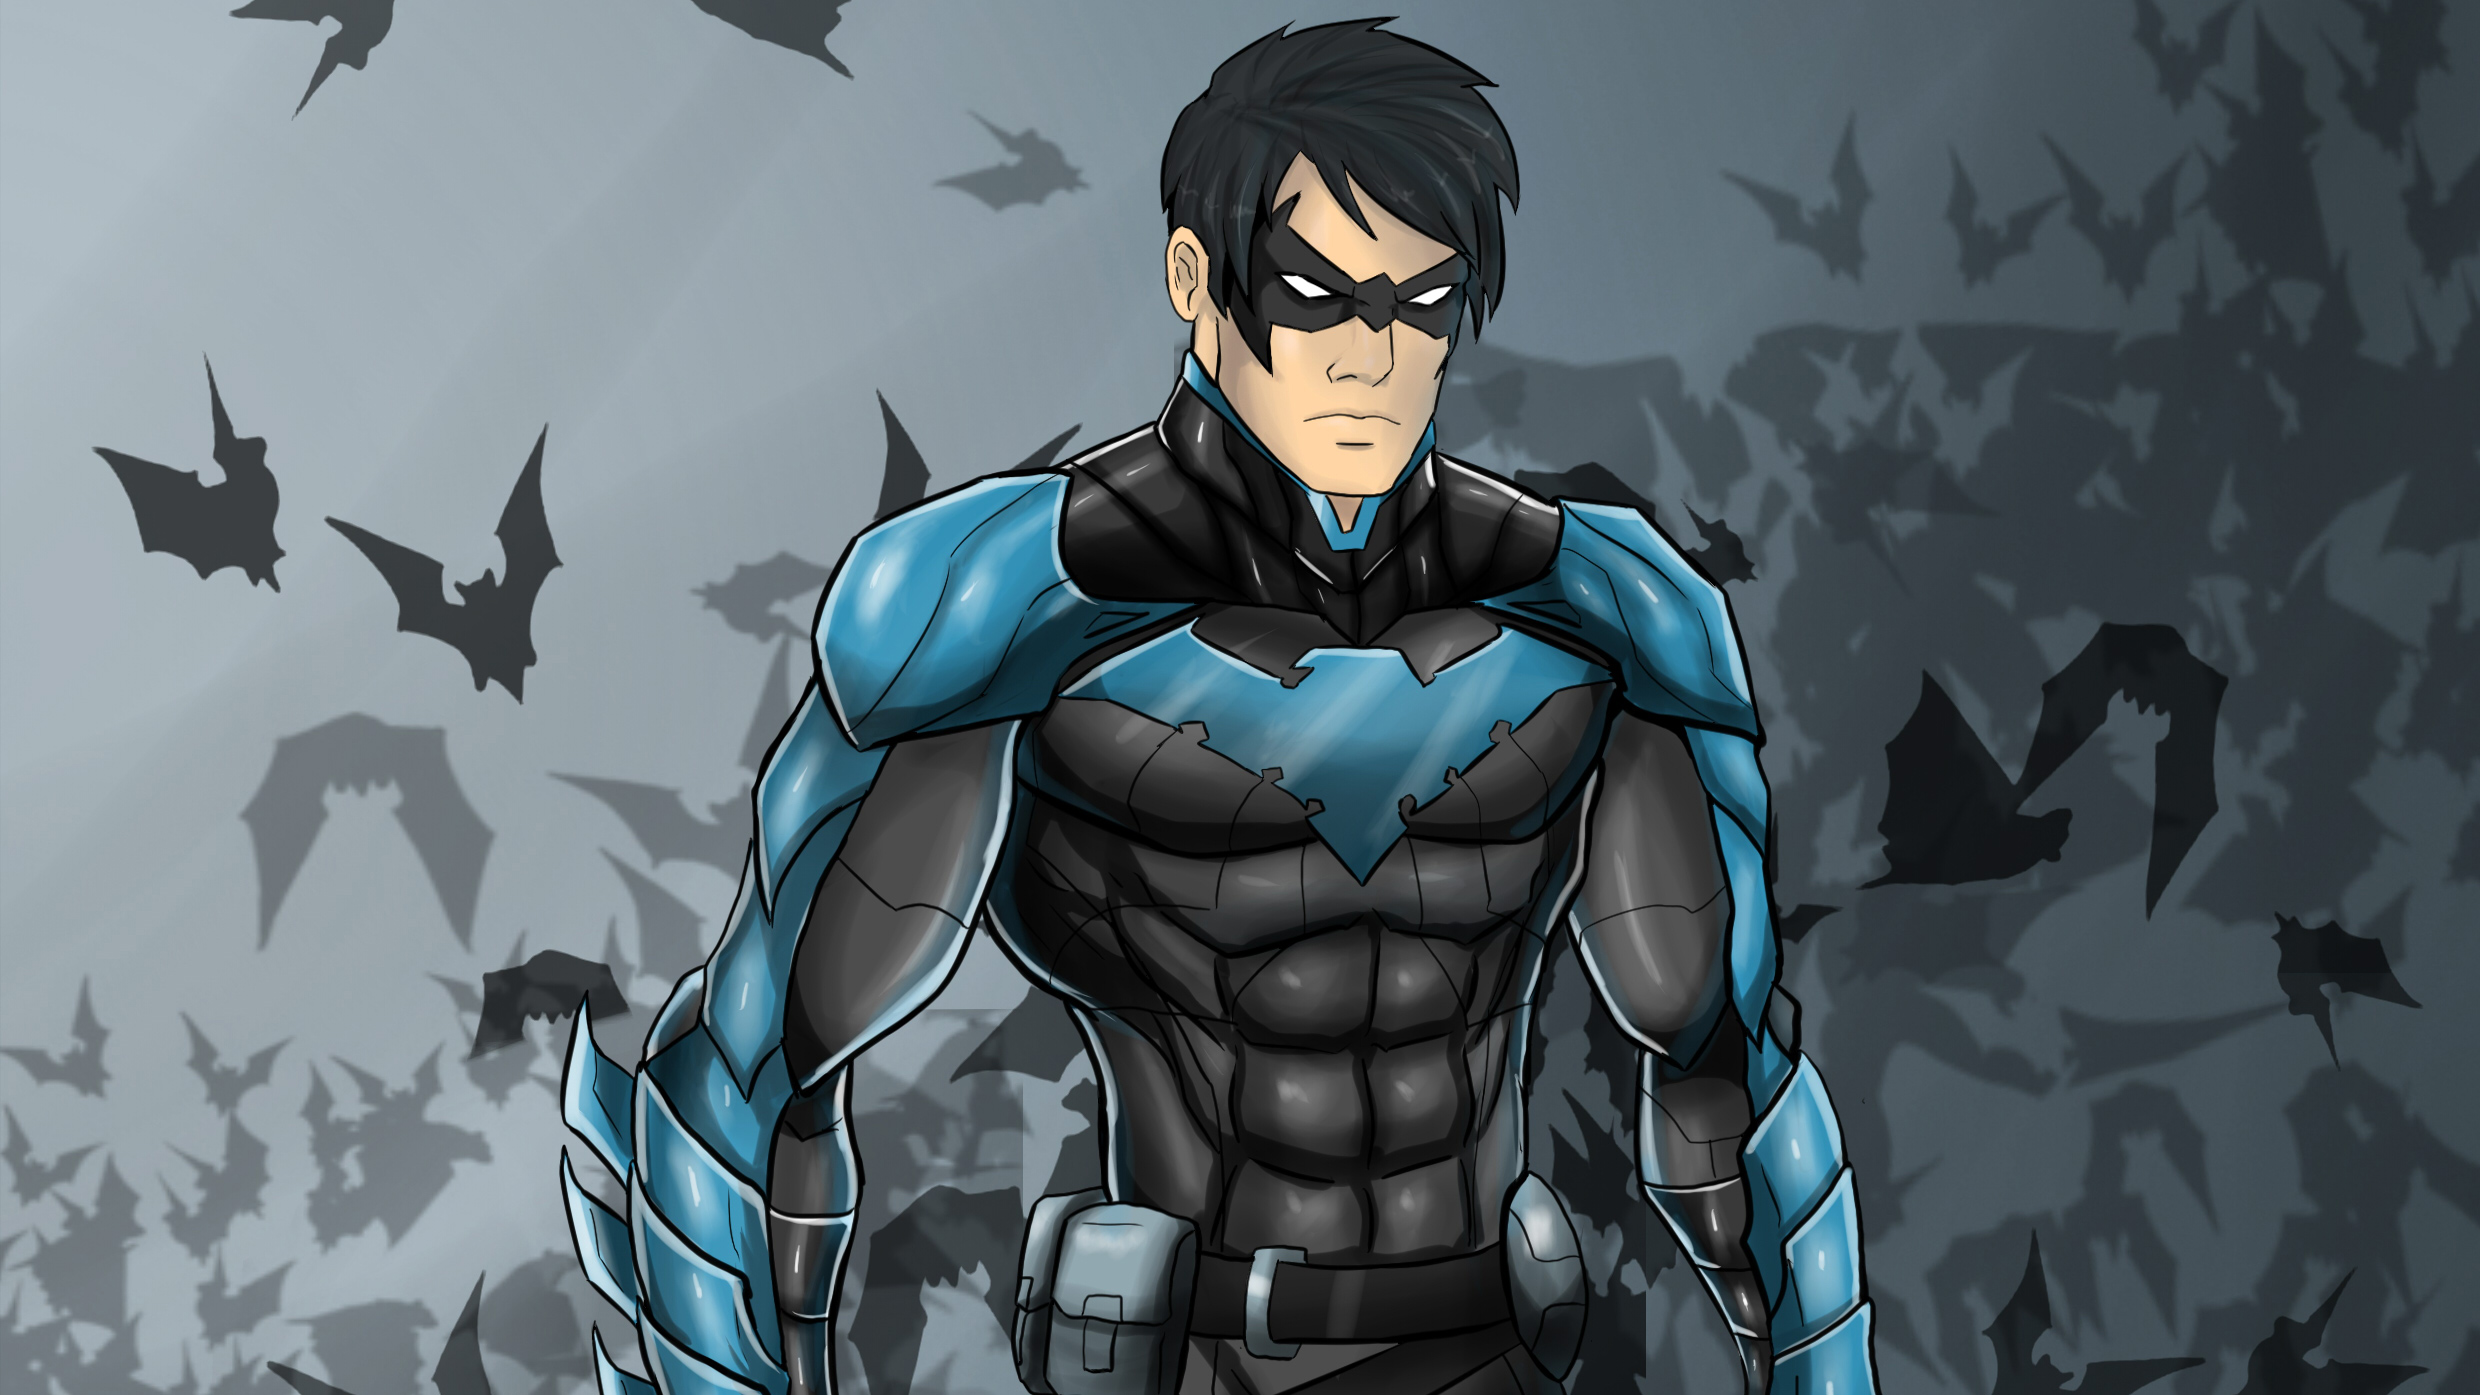 Nightwing Arts HD Superheroes 4k Wallpapers Images Backgrounds.